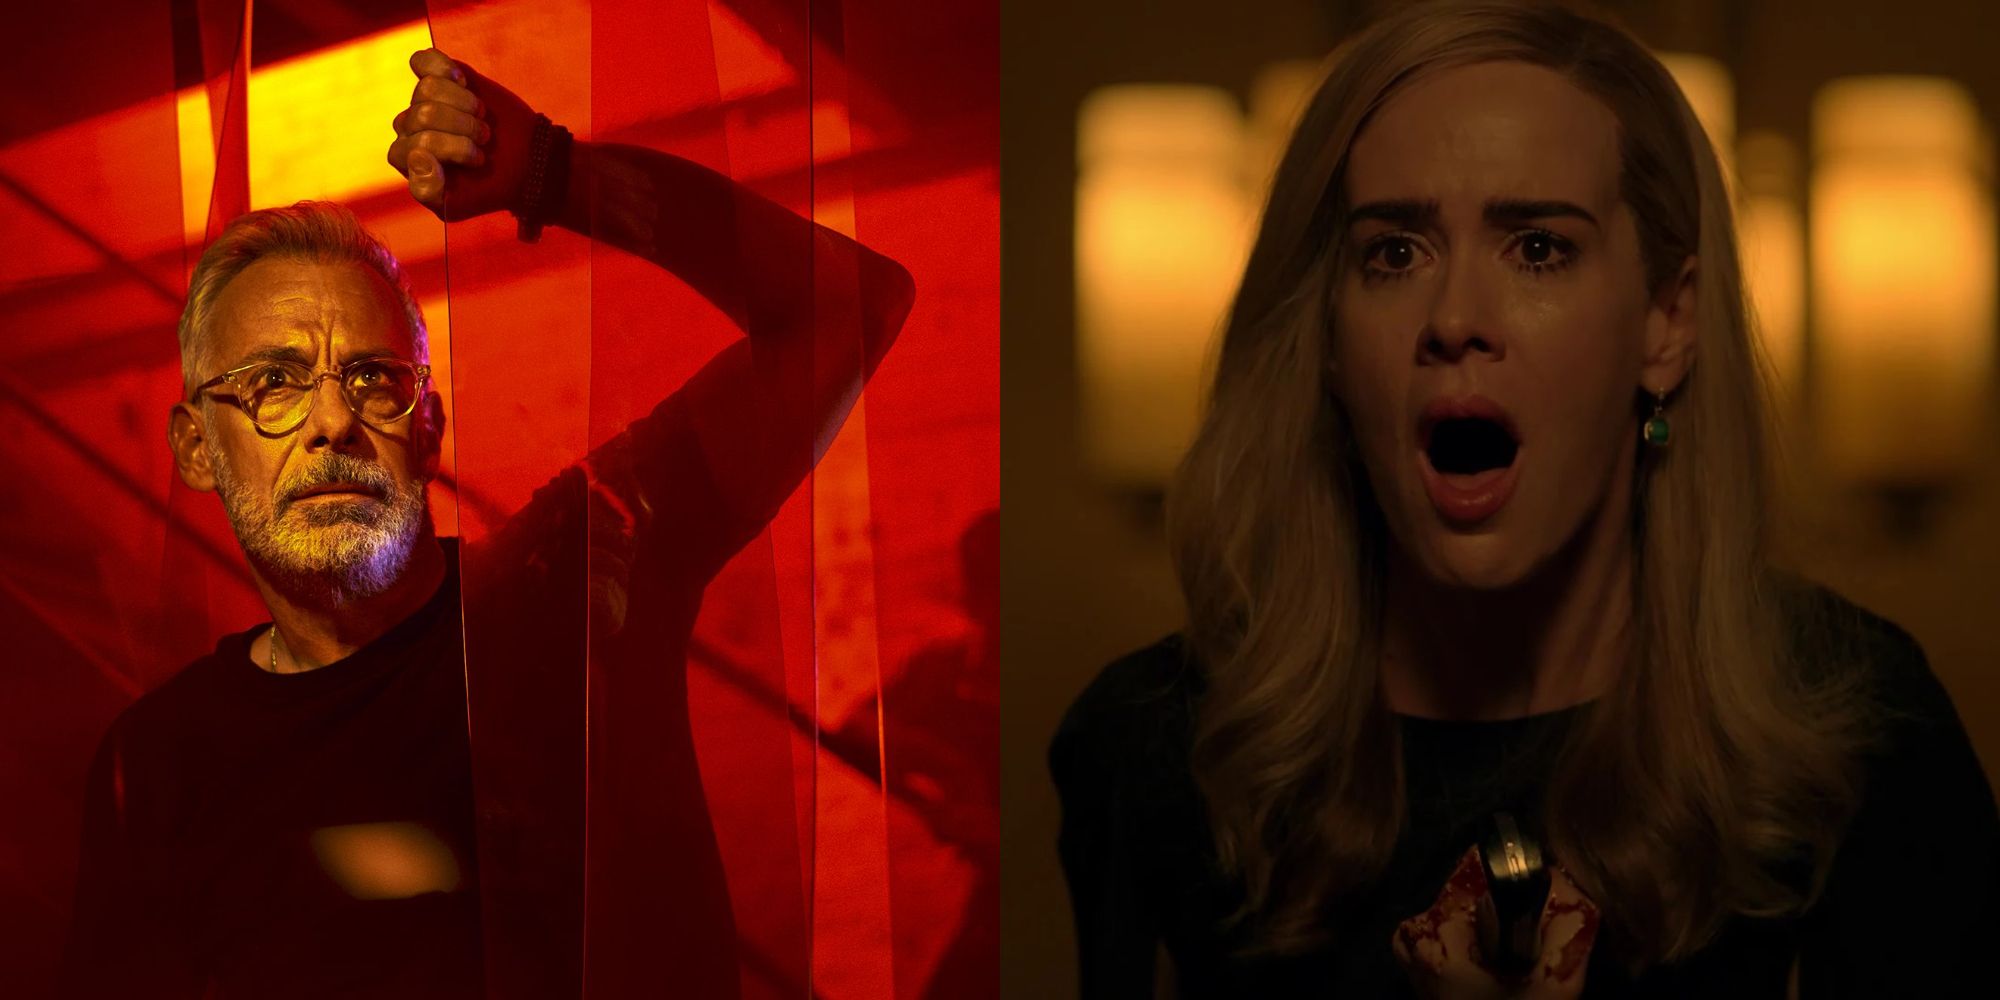 A character from AHS: NYC and Sarah Paulson looking shocked